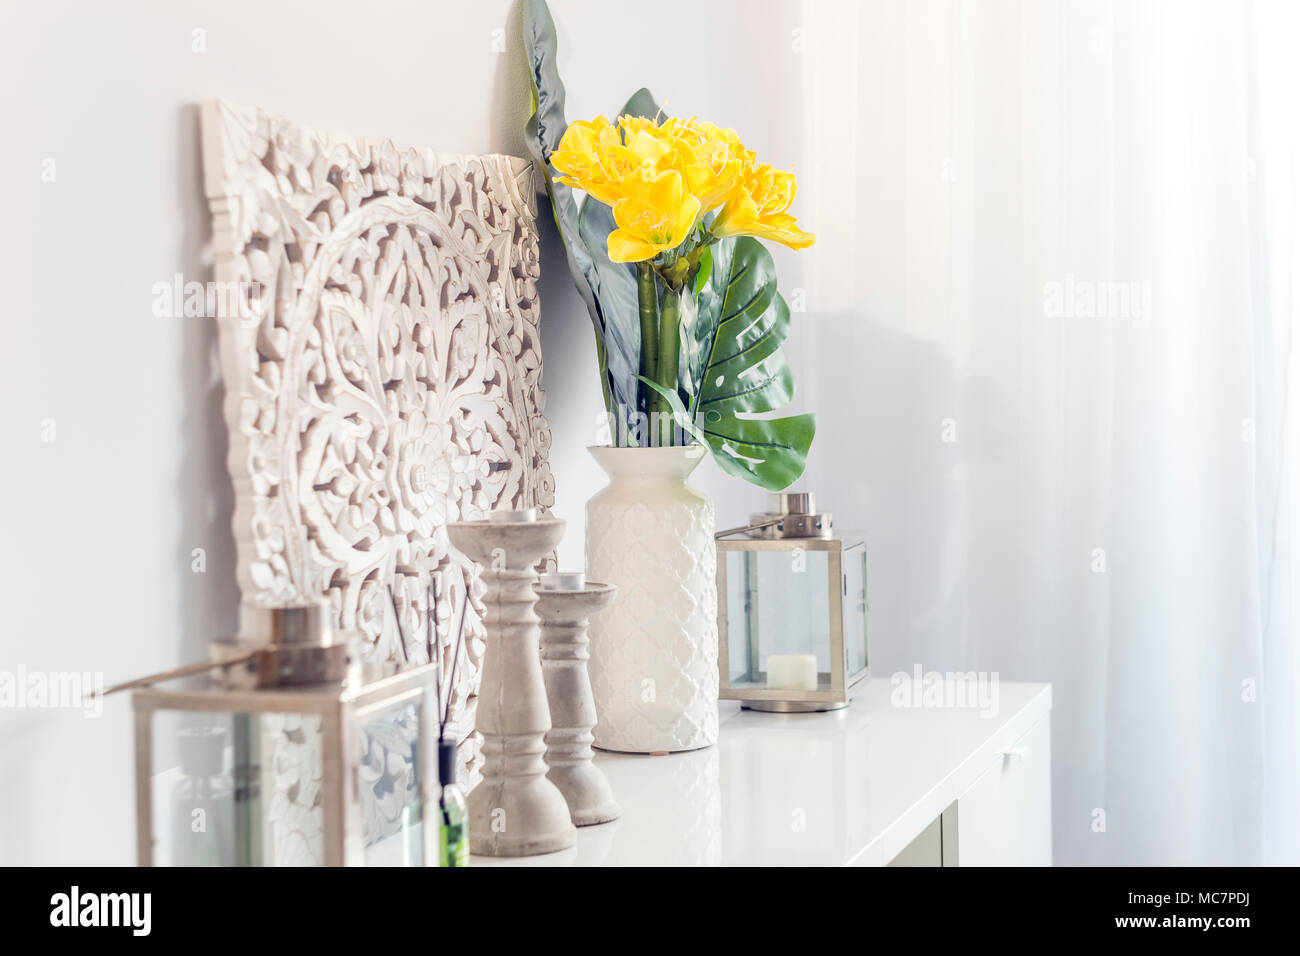 Yellow flowers in ceramic vase with wooden candlesticks and lantern decorating a shelf in a living room Stock Photo